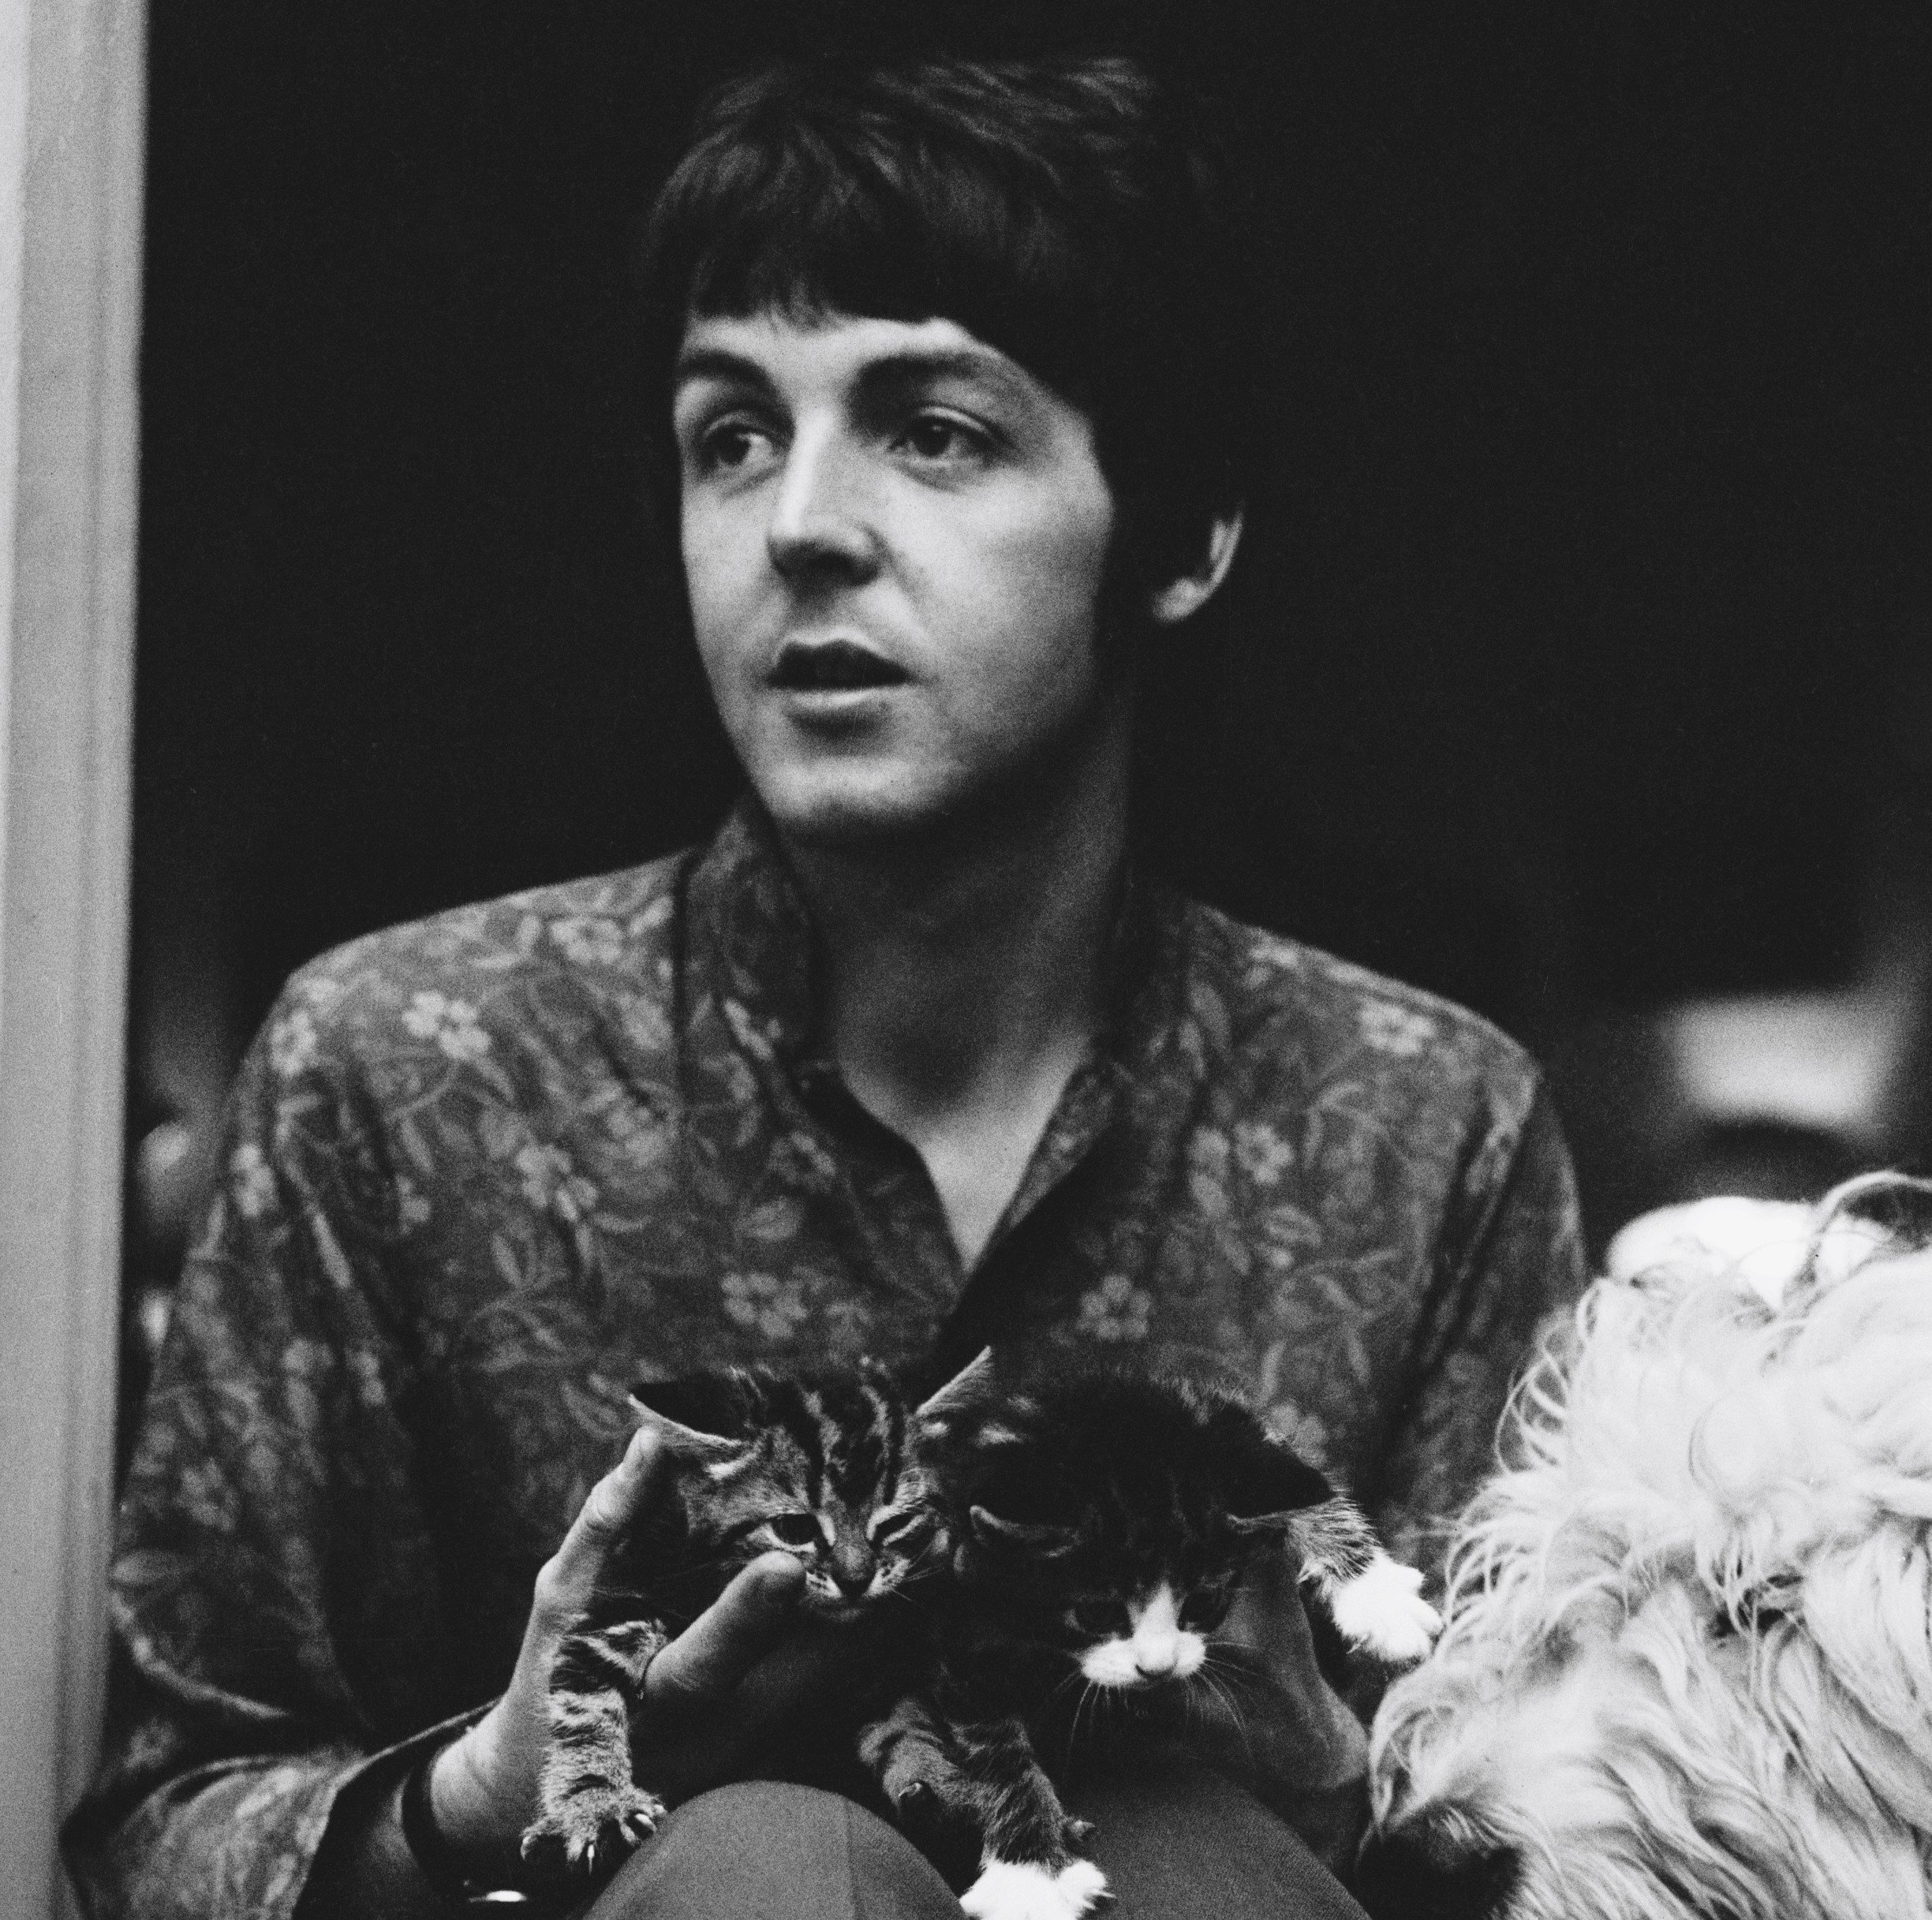 Paul McCartney with a dog during The Beatles' "Why Don't We Do It in the Road" era